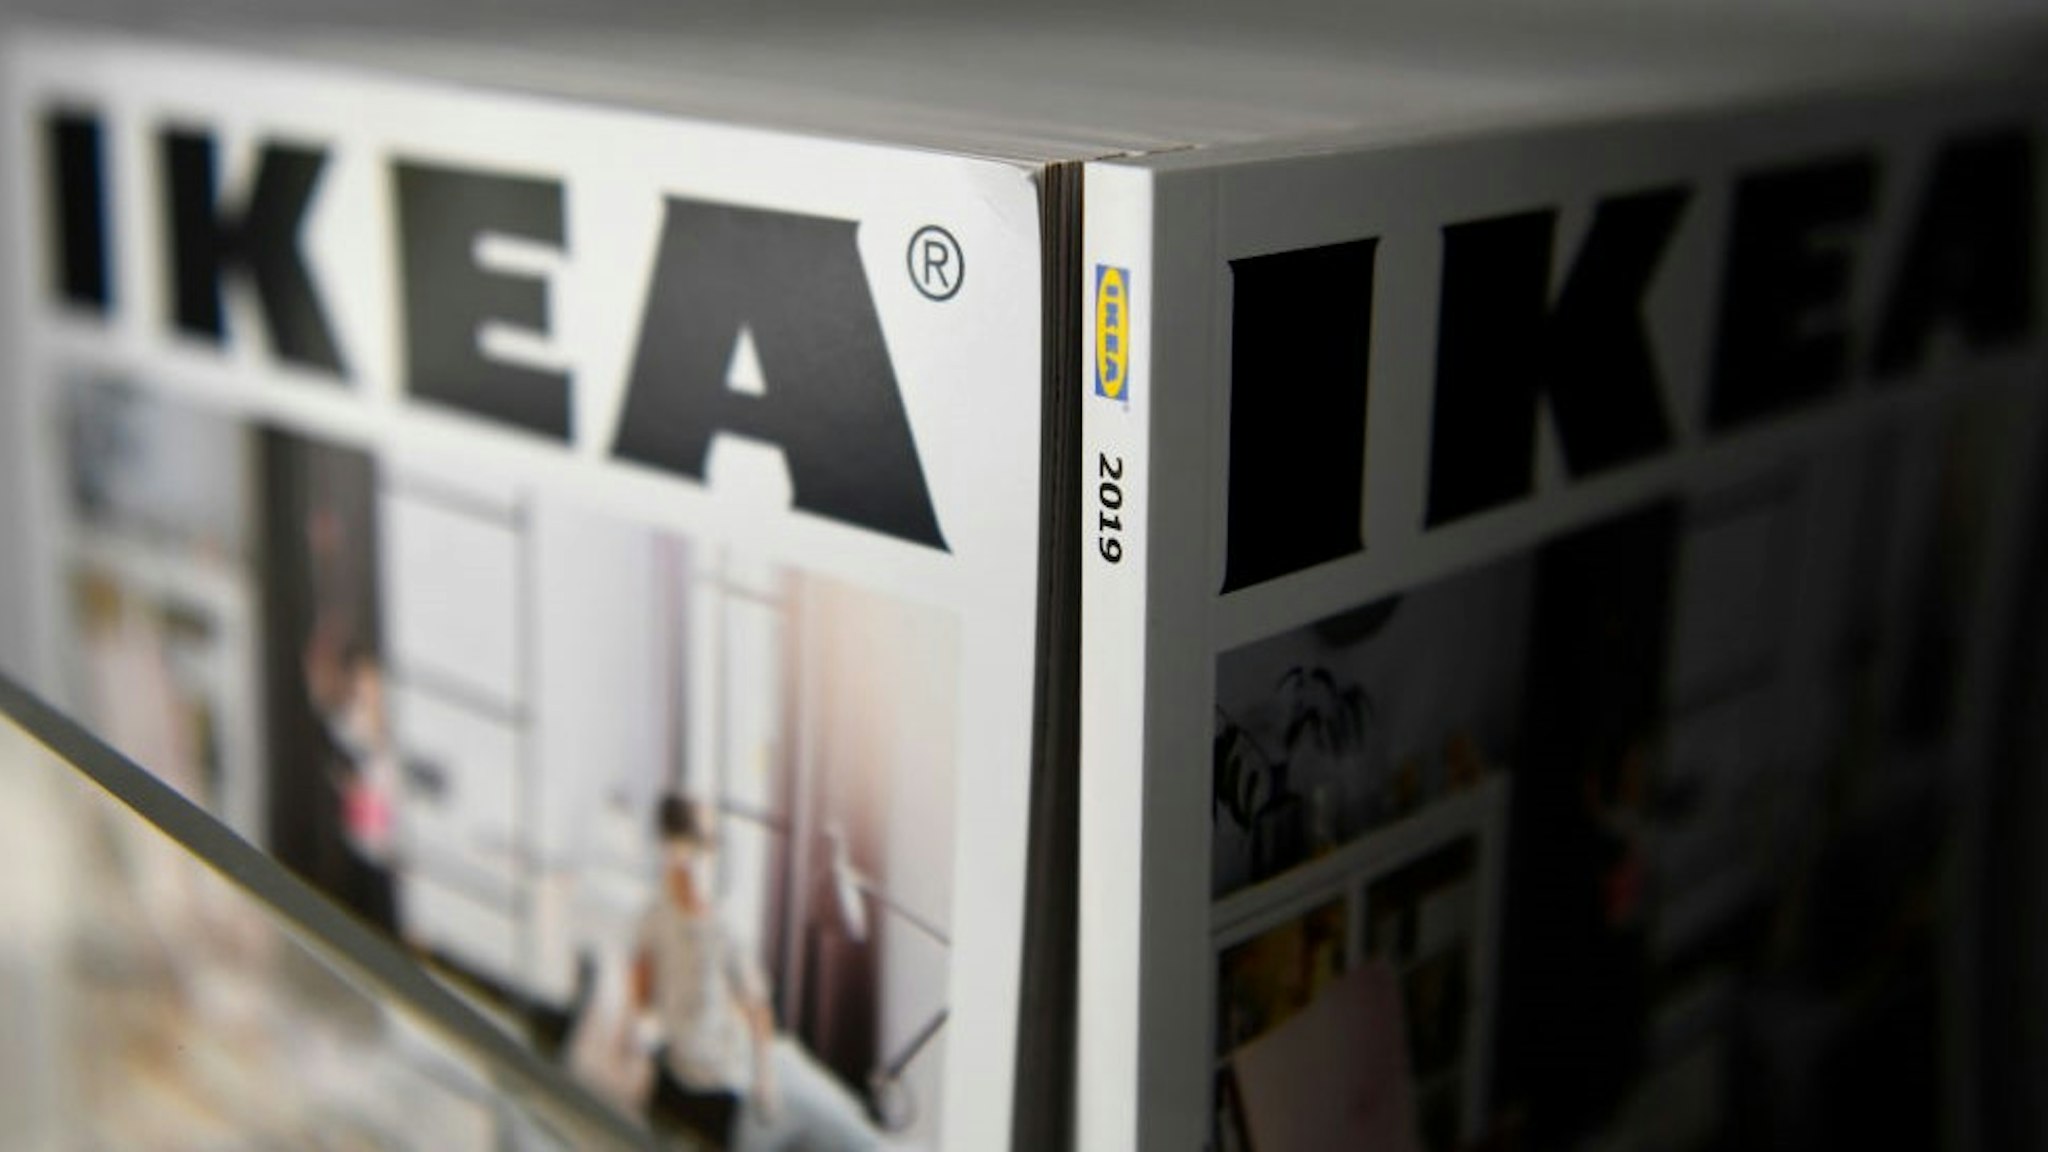 Catalogues are displayed at a store of the Swedish furniture giant Ikea in Madrid city center on October 10, 2018. (Photo by GABRIEL BOUYS / AFP) (Photo credit should read